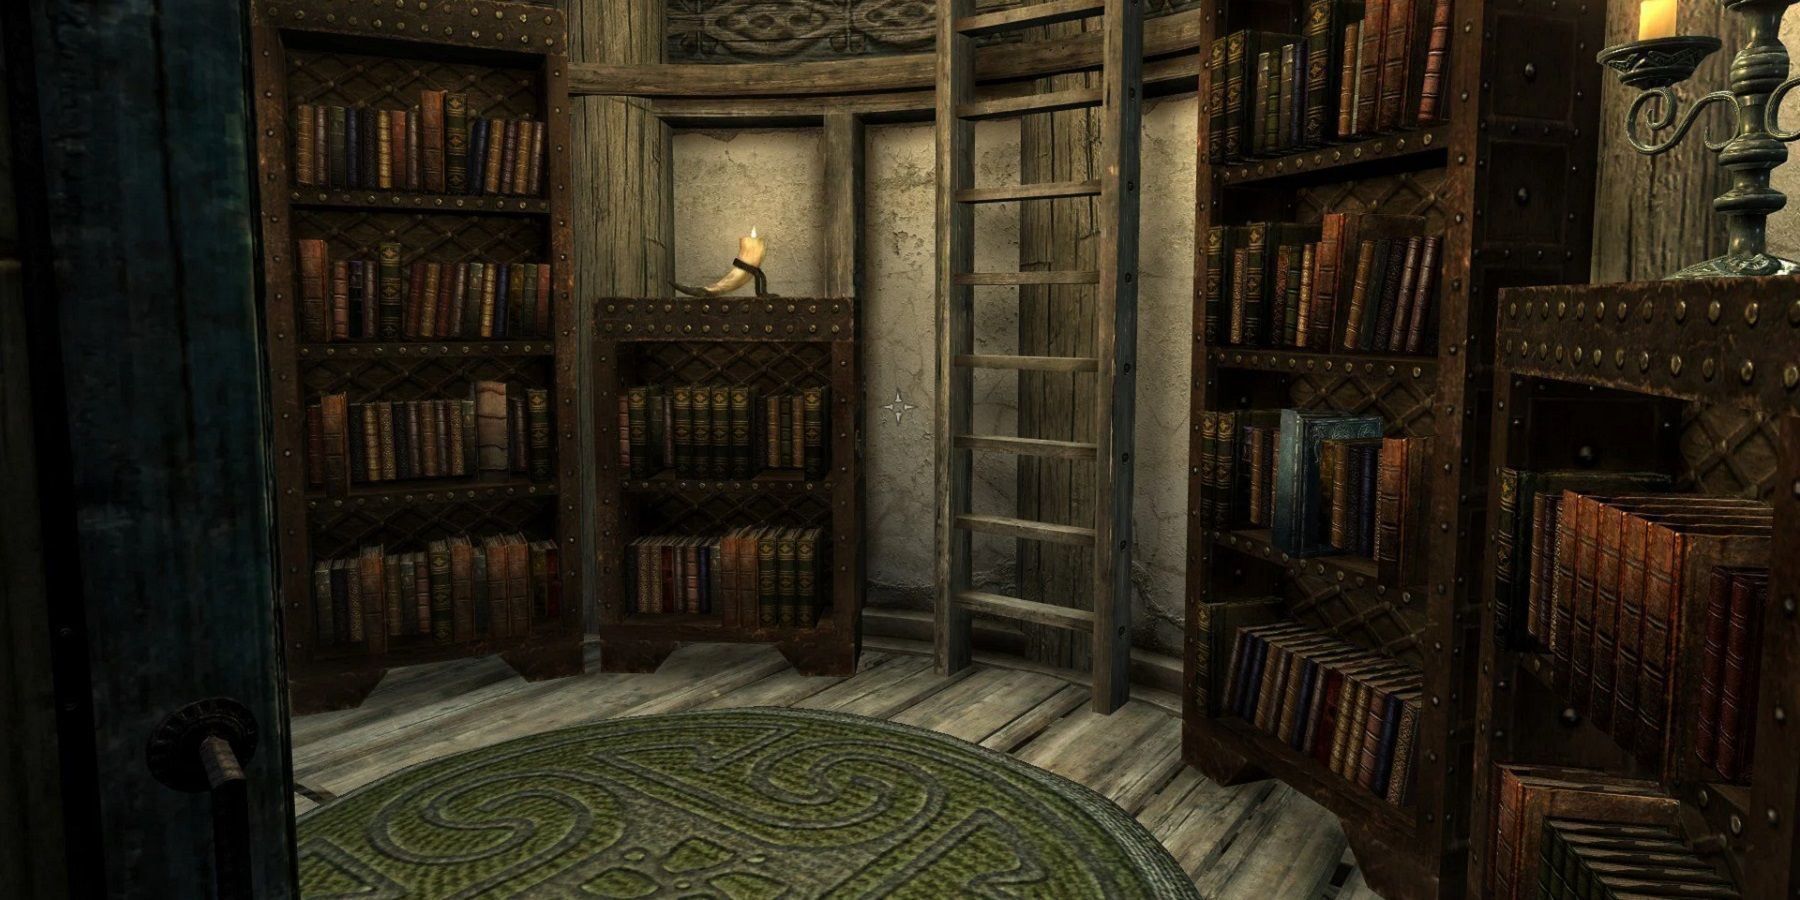 An image from The Elder Scrolls 5: Skryim showing a room with bookcases all full of books.